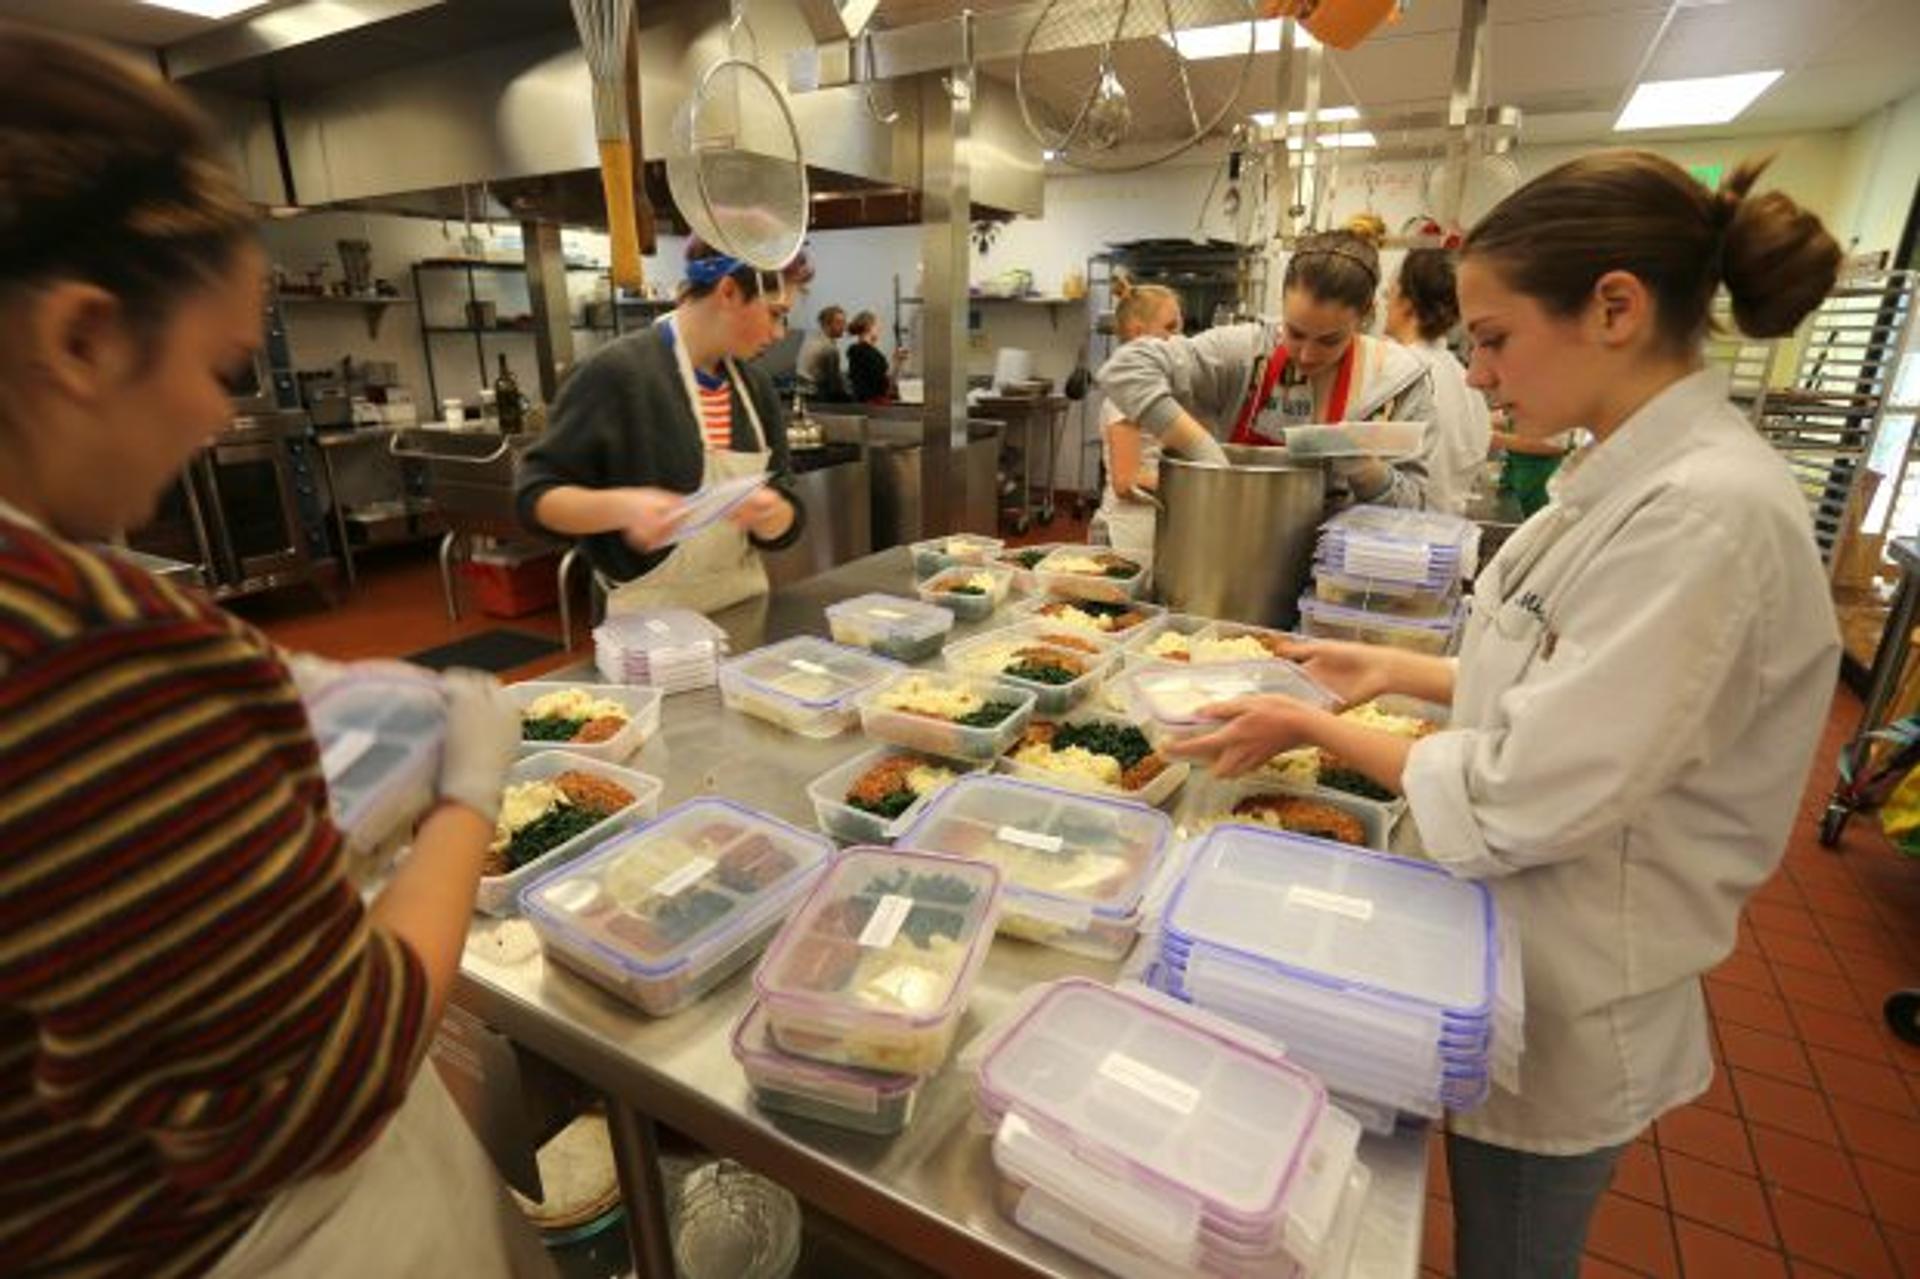 Teen chefs fill meal containers for the day's deliveries of nutritious food.